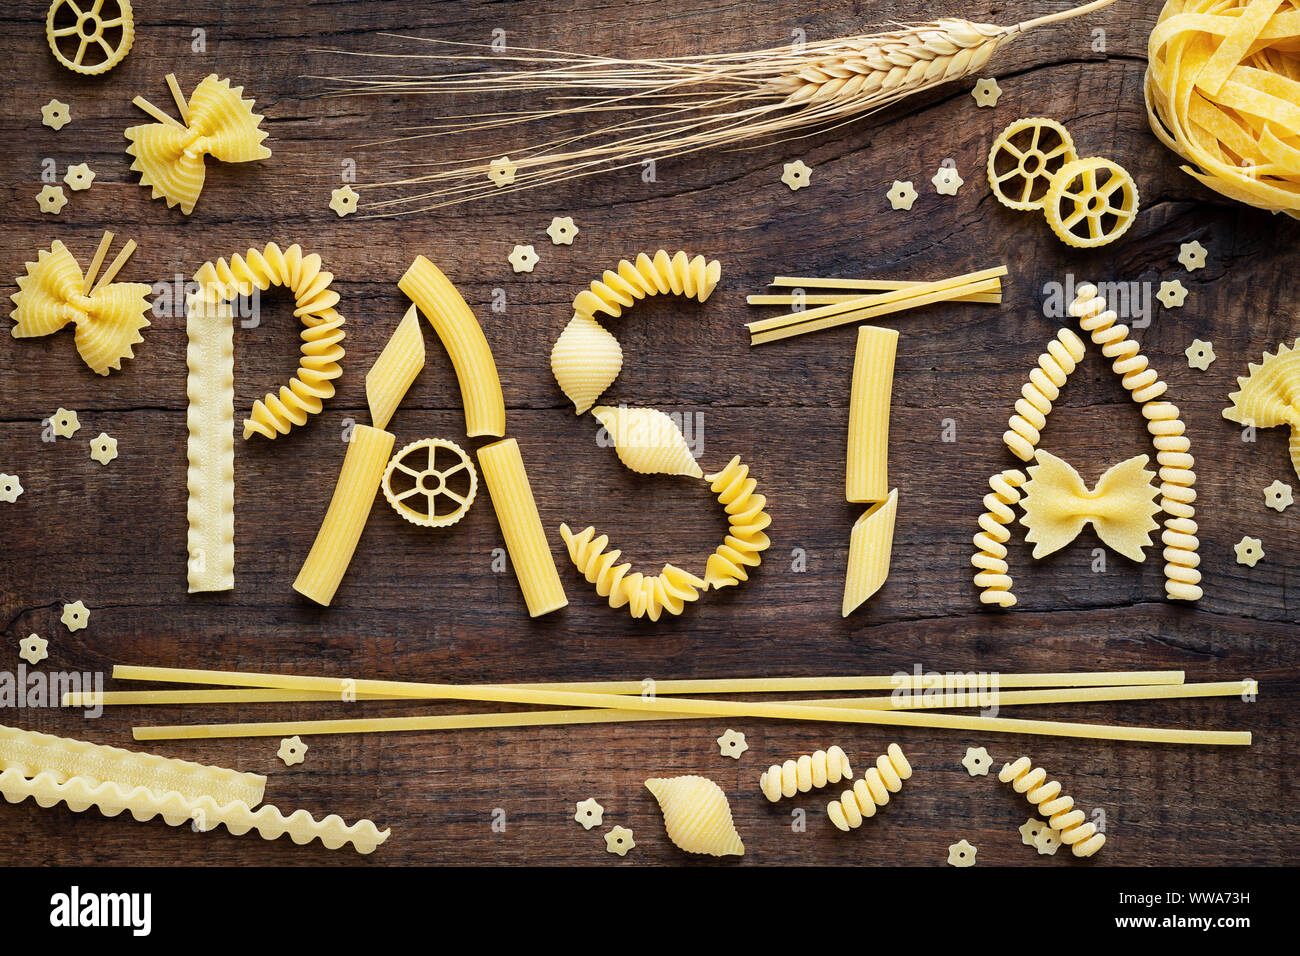 Variety of types and shapes of dry Italian pasta concept. Pasta word made of fusilli, spaghetti, penne, conchiglie, farfalle and ruote Stock Photo